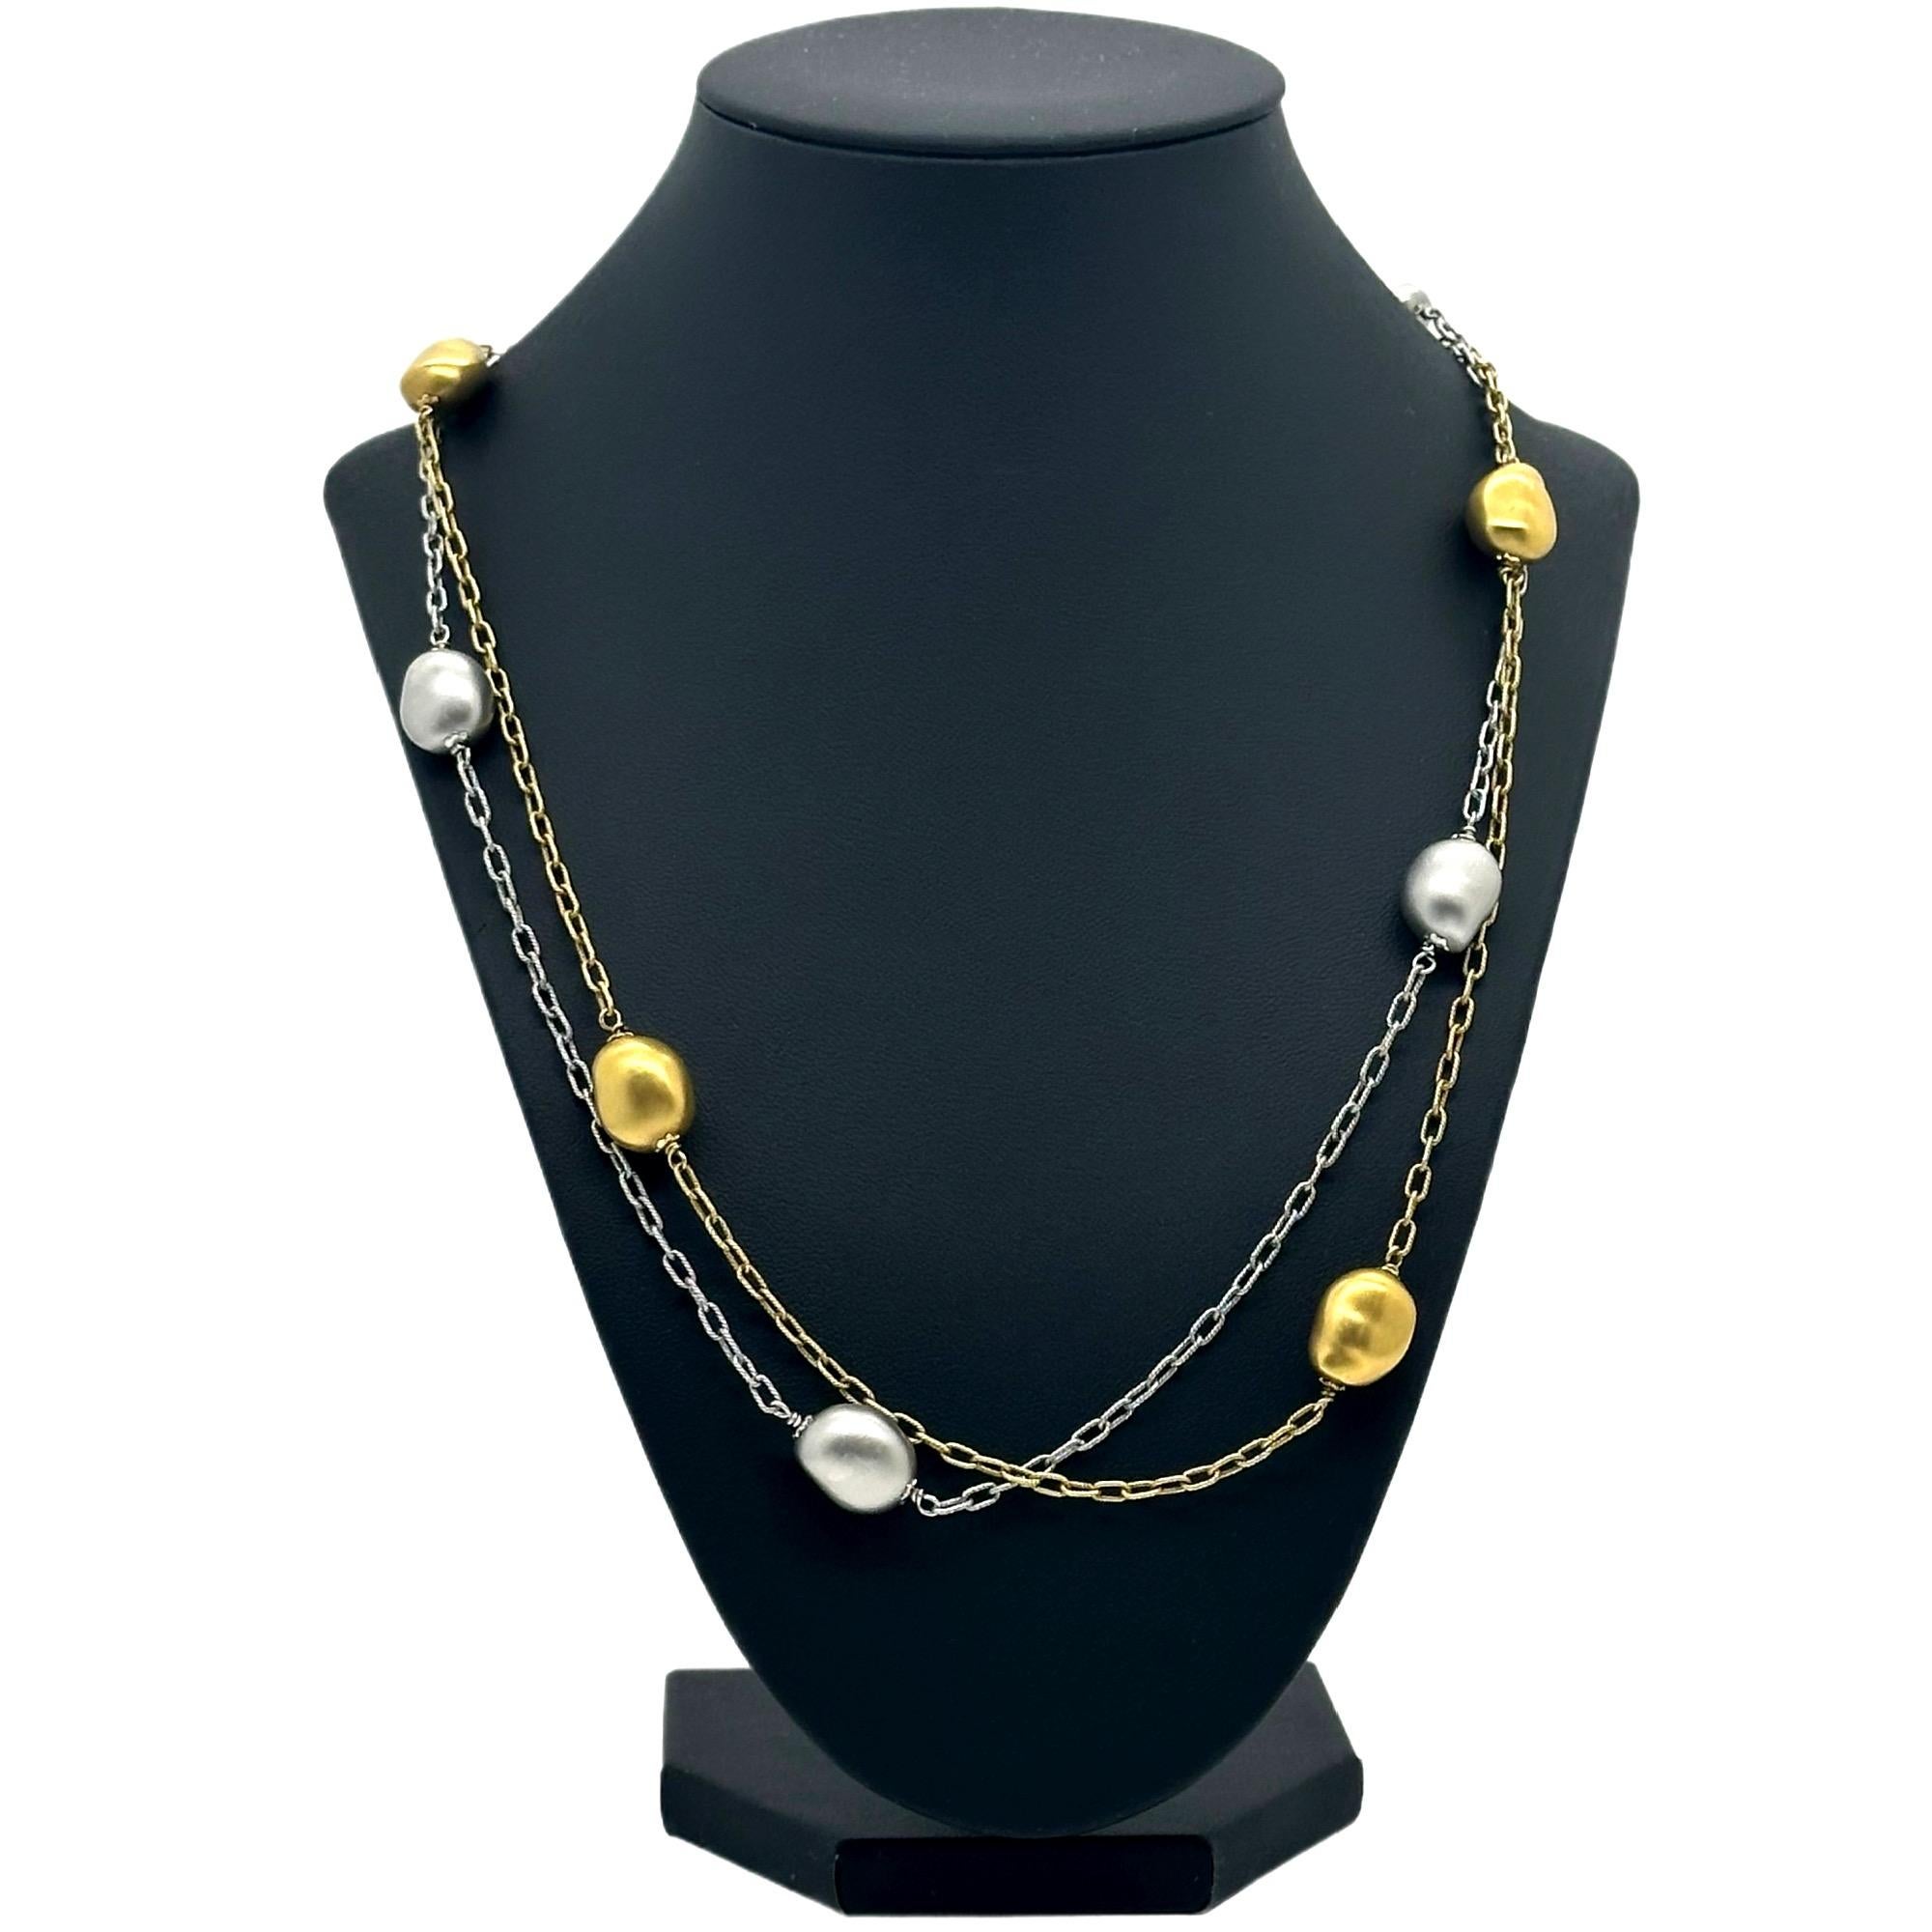 Roberto Coin Nugget Collection Double Strand Two-Toned Necklace
Style:  Double Strand with Toggle Closure
Metal:  18kt White & Yellow Brushed Gold
Size / Measurements:  22' Inches
Size:  ~ 9 MM Nugget Size
Weight:  31.7 Grams
Hallmark:  18KT ITALY